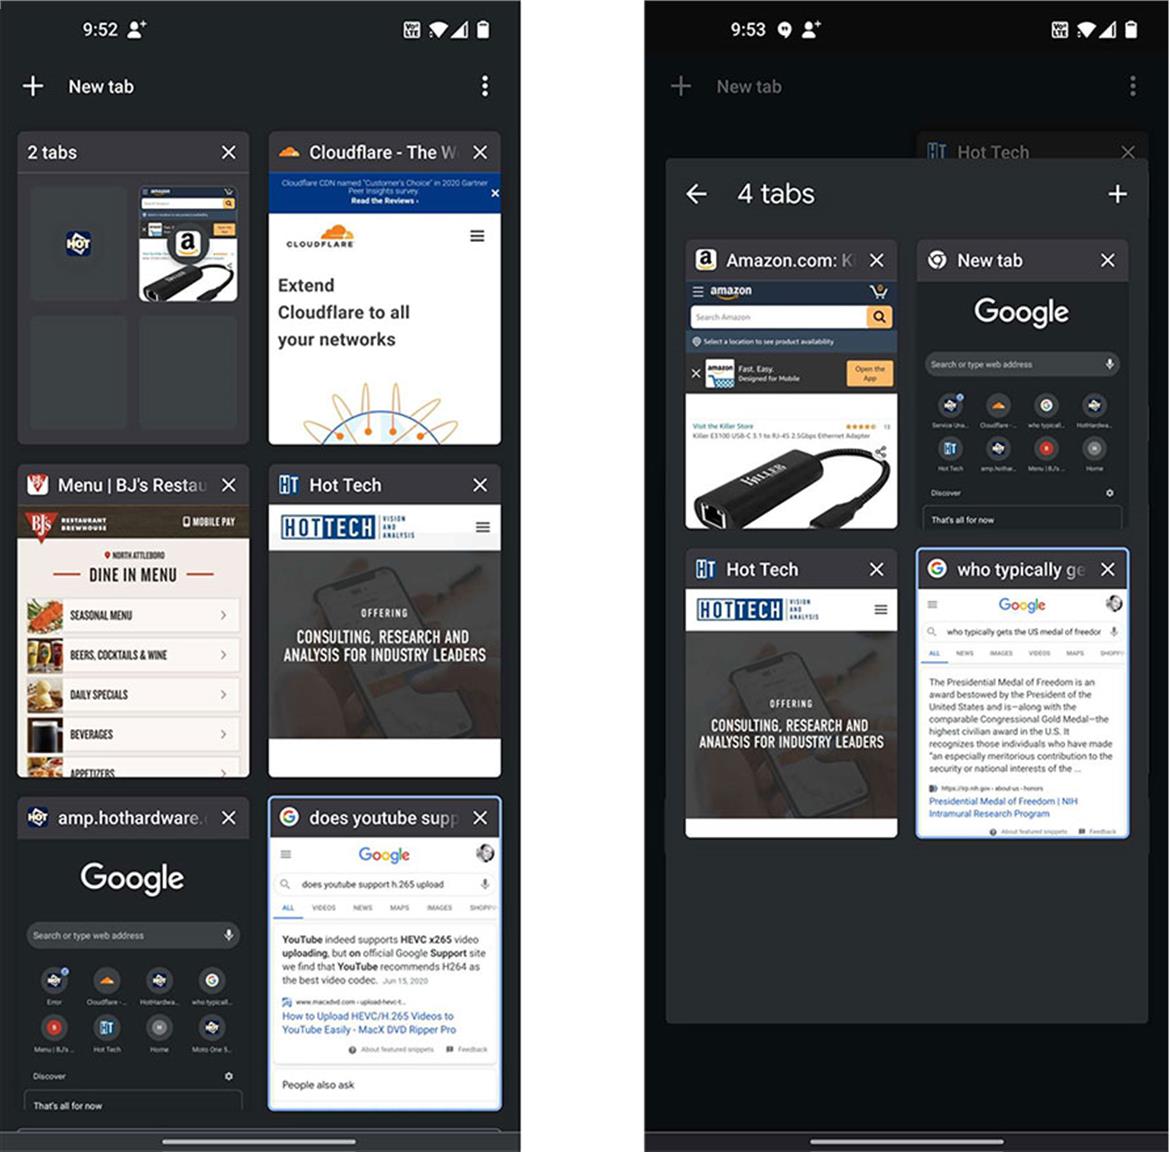 Google Chrome For Android Gains Powerful Group Tabbing Feature, Here's How It Works